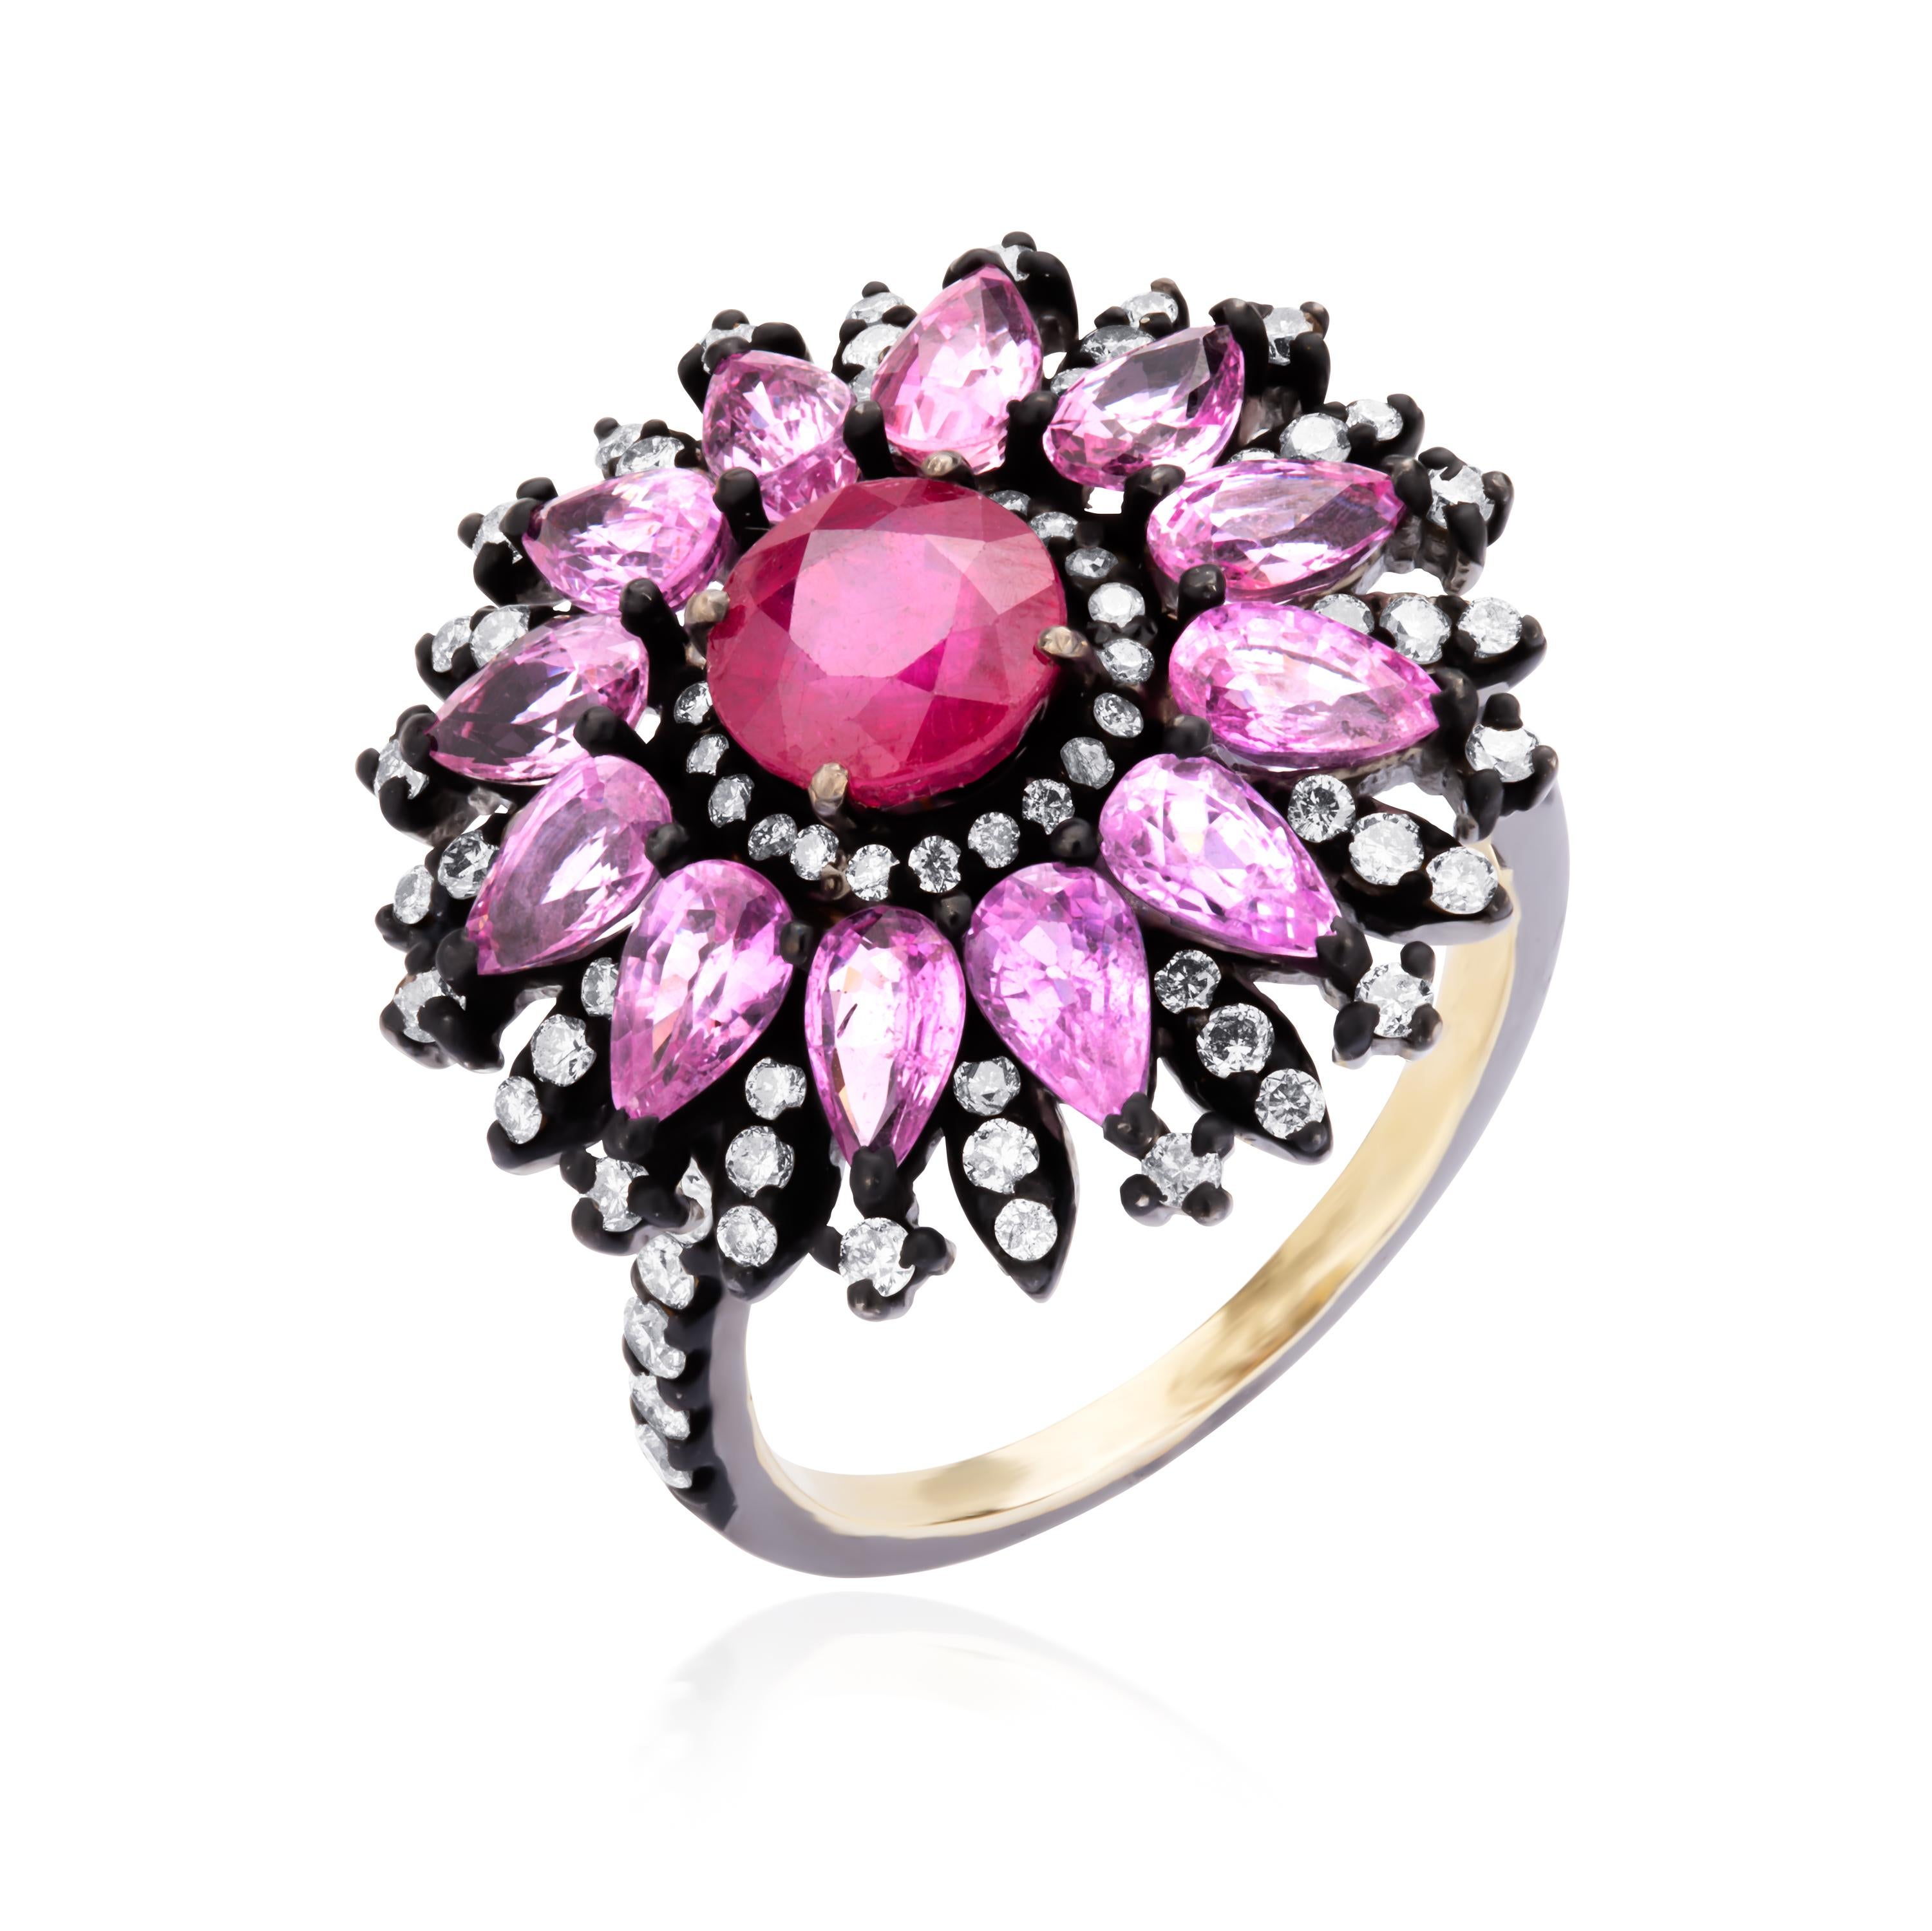 A gorgeous, round faceted ruby, weighing 1.59 Cts, is decorated within pear cut pink sapphires and diamonds forming a floral center design. Handcrafted in rhodium over 18K gold, flower motif is supported by a diamond embellished shank.
Please follow